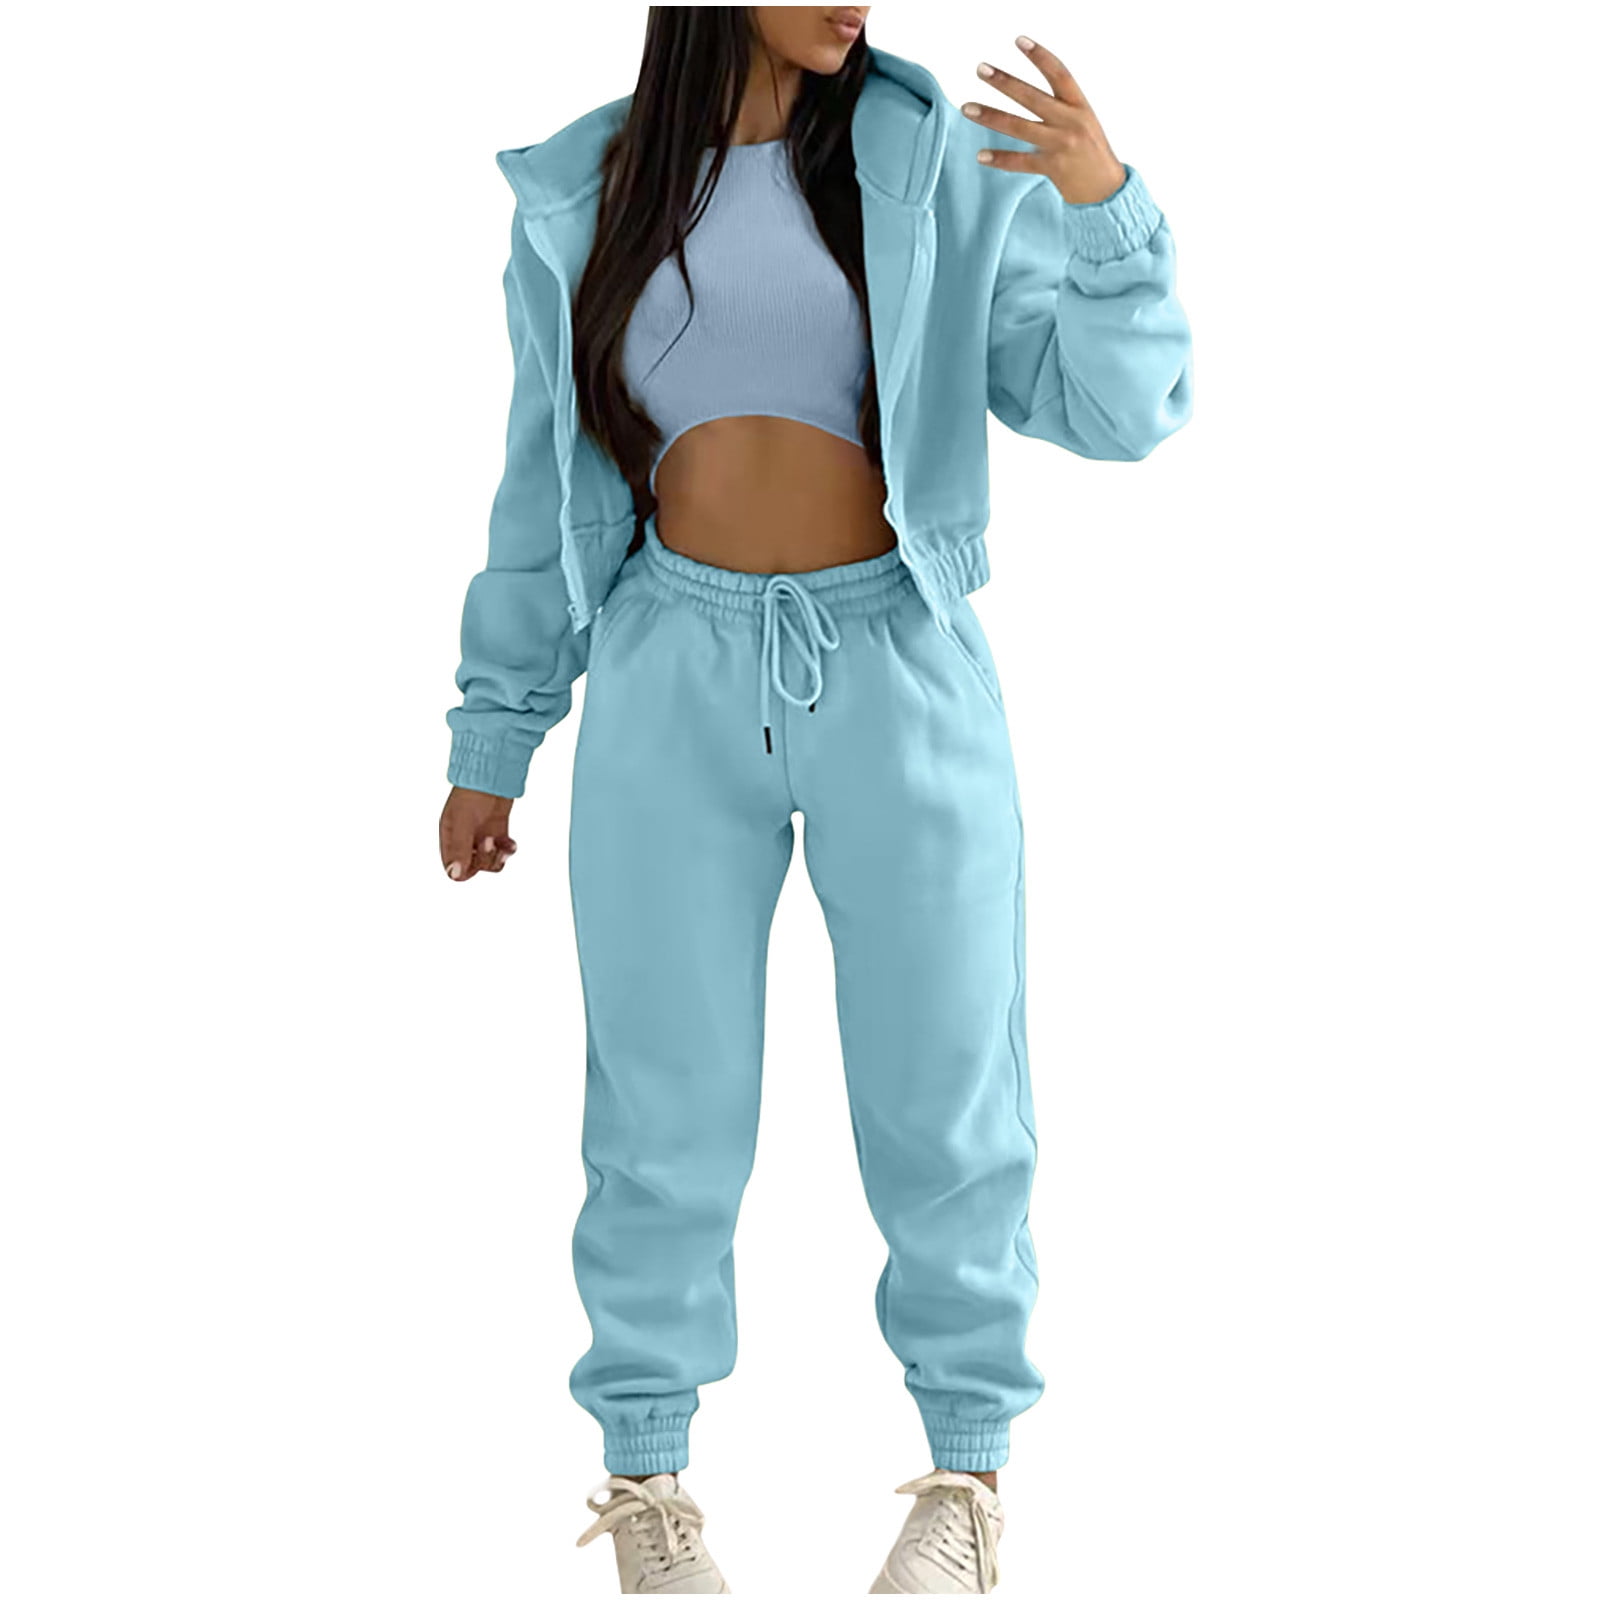 Sweatsuits for Womens 3 Piece Sports Outfits Fleece Hoodie Crop Jacket Tank  Vest and Tie Jogger Sweatpant Pants Set (Small, Light Blue) 